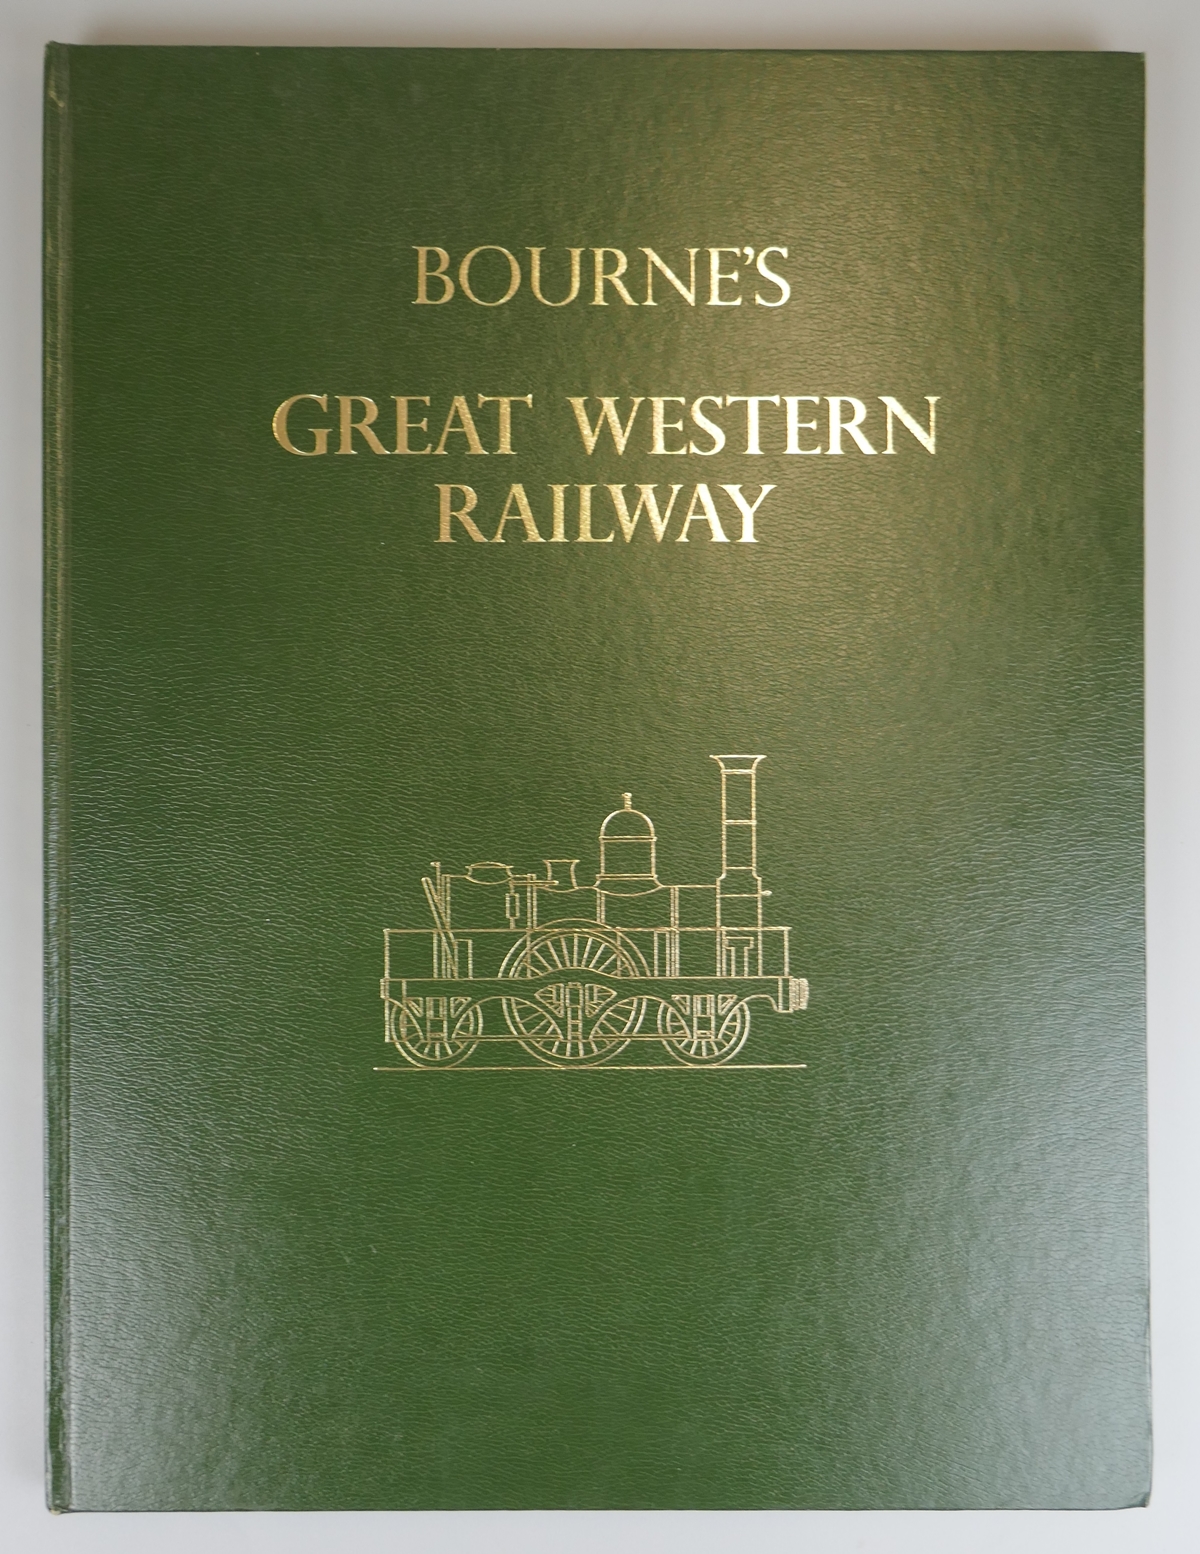 Large book - Bourne's Great Western Railway